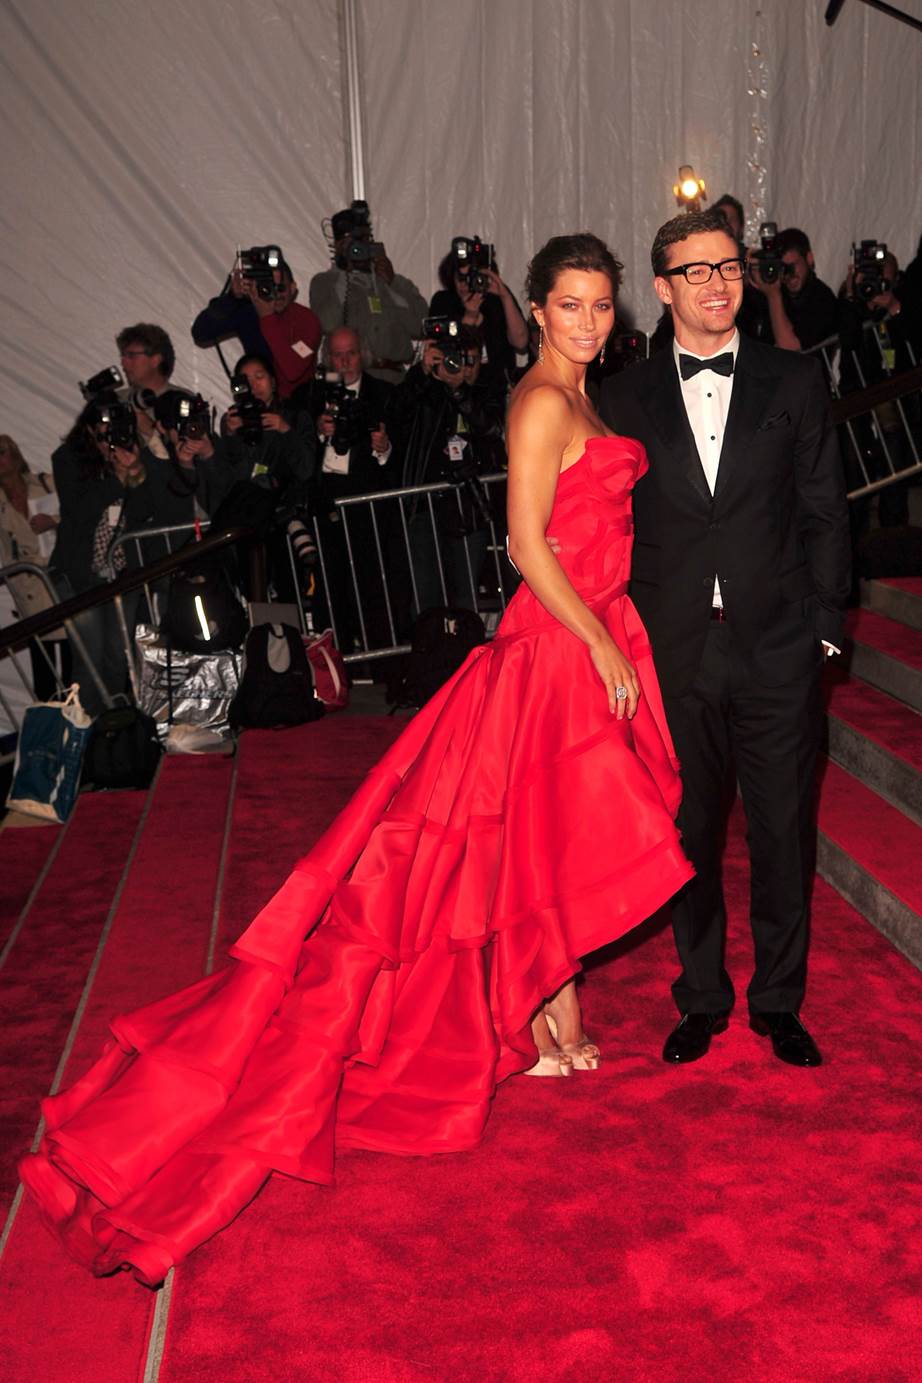 Jessica Biel and Justin Timberlake, 2009 Jessica Biel wore red Versace back before the dancing lady emoji was a thing in 2009, while Justin Timberlake wore a suit from his own line, William Rast.